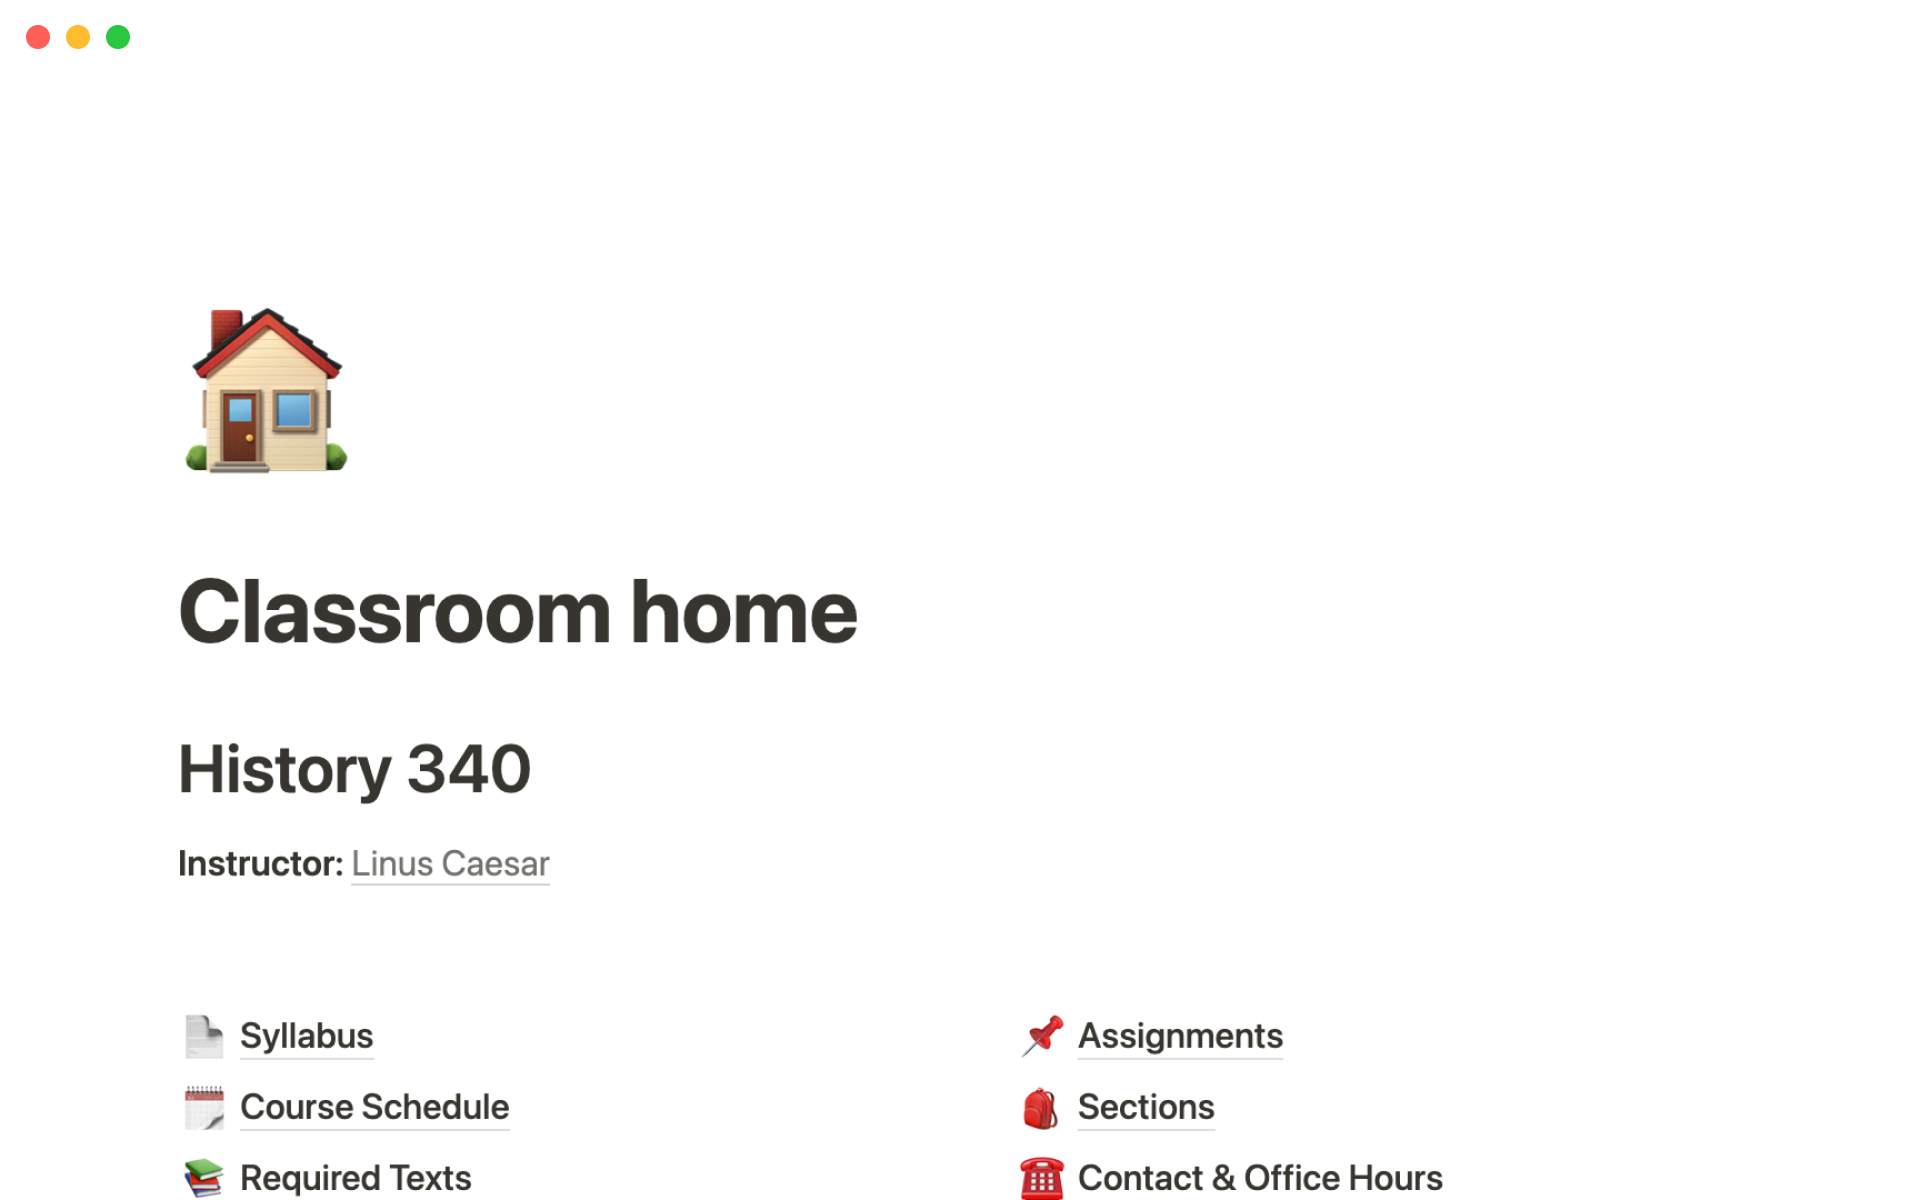 The desktop image for the Classroom home template